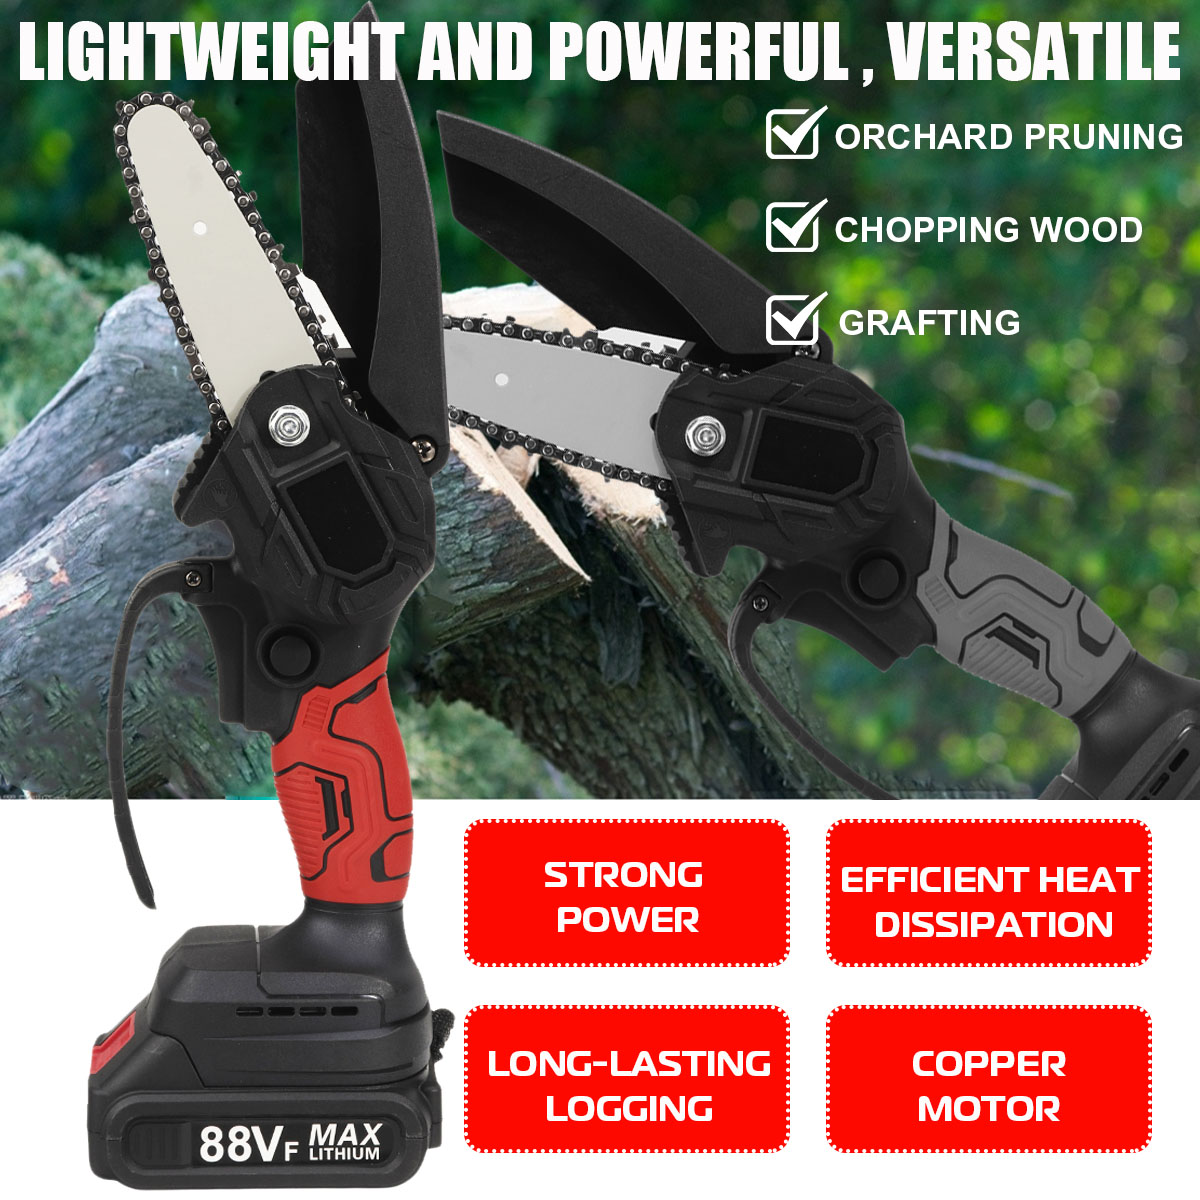 88VF-4-Inch-Battery-Indicator-Electric-Chainsaws-Wood-Cutter-One-Hand-Saw-Woodworking-Tool-W-None12--1866700-4